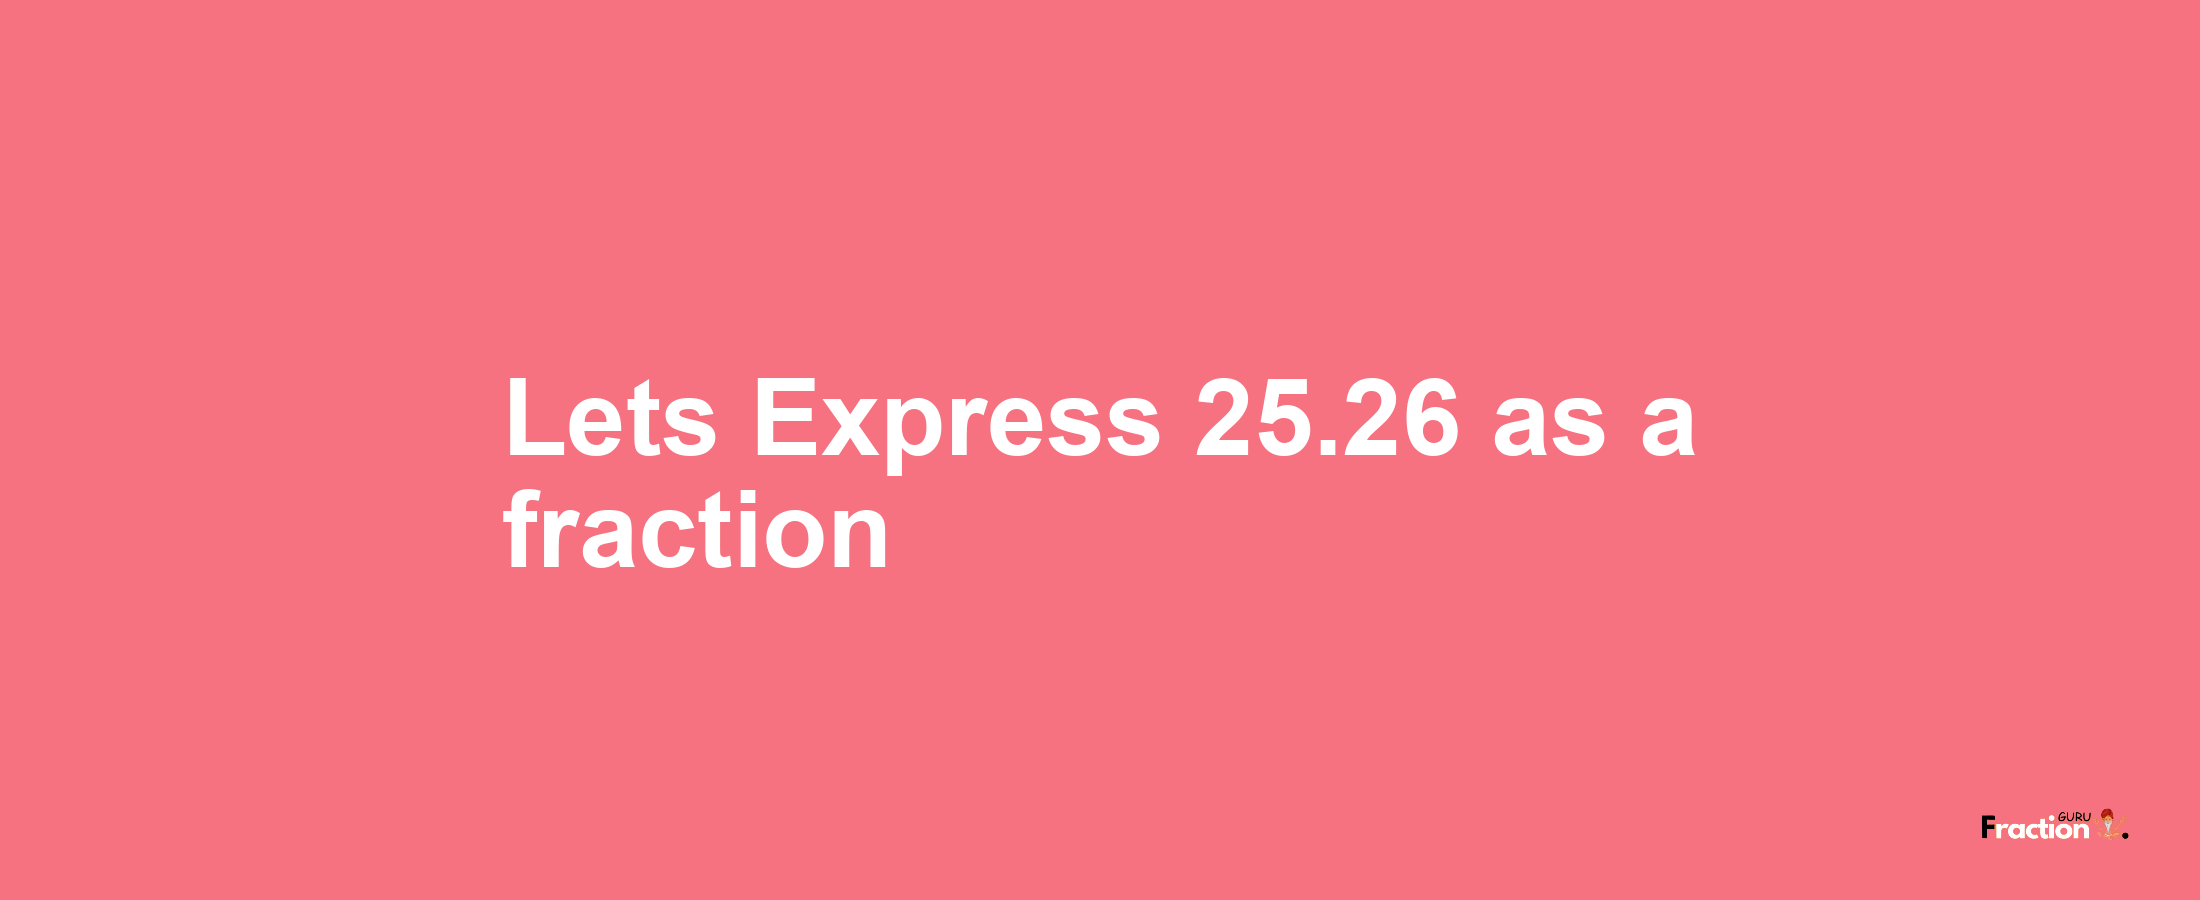 Lets Express 25.26 as afraction